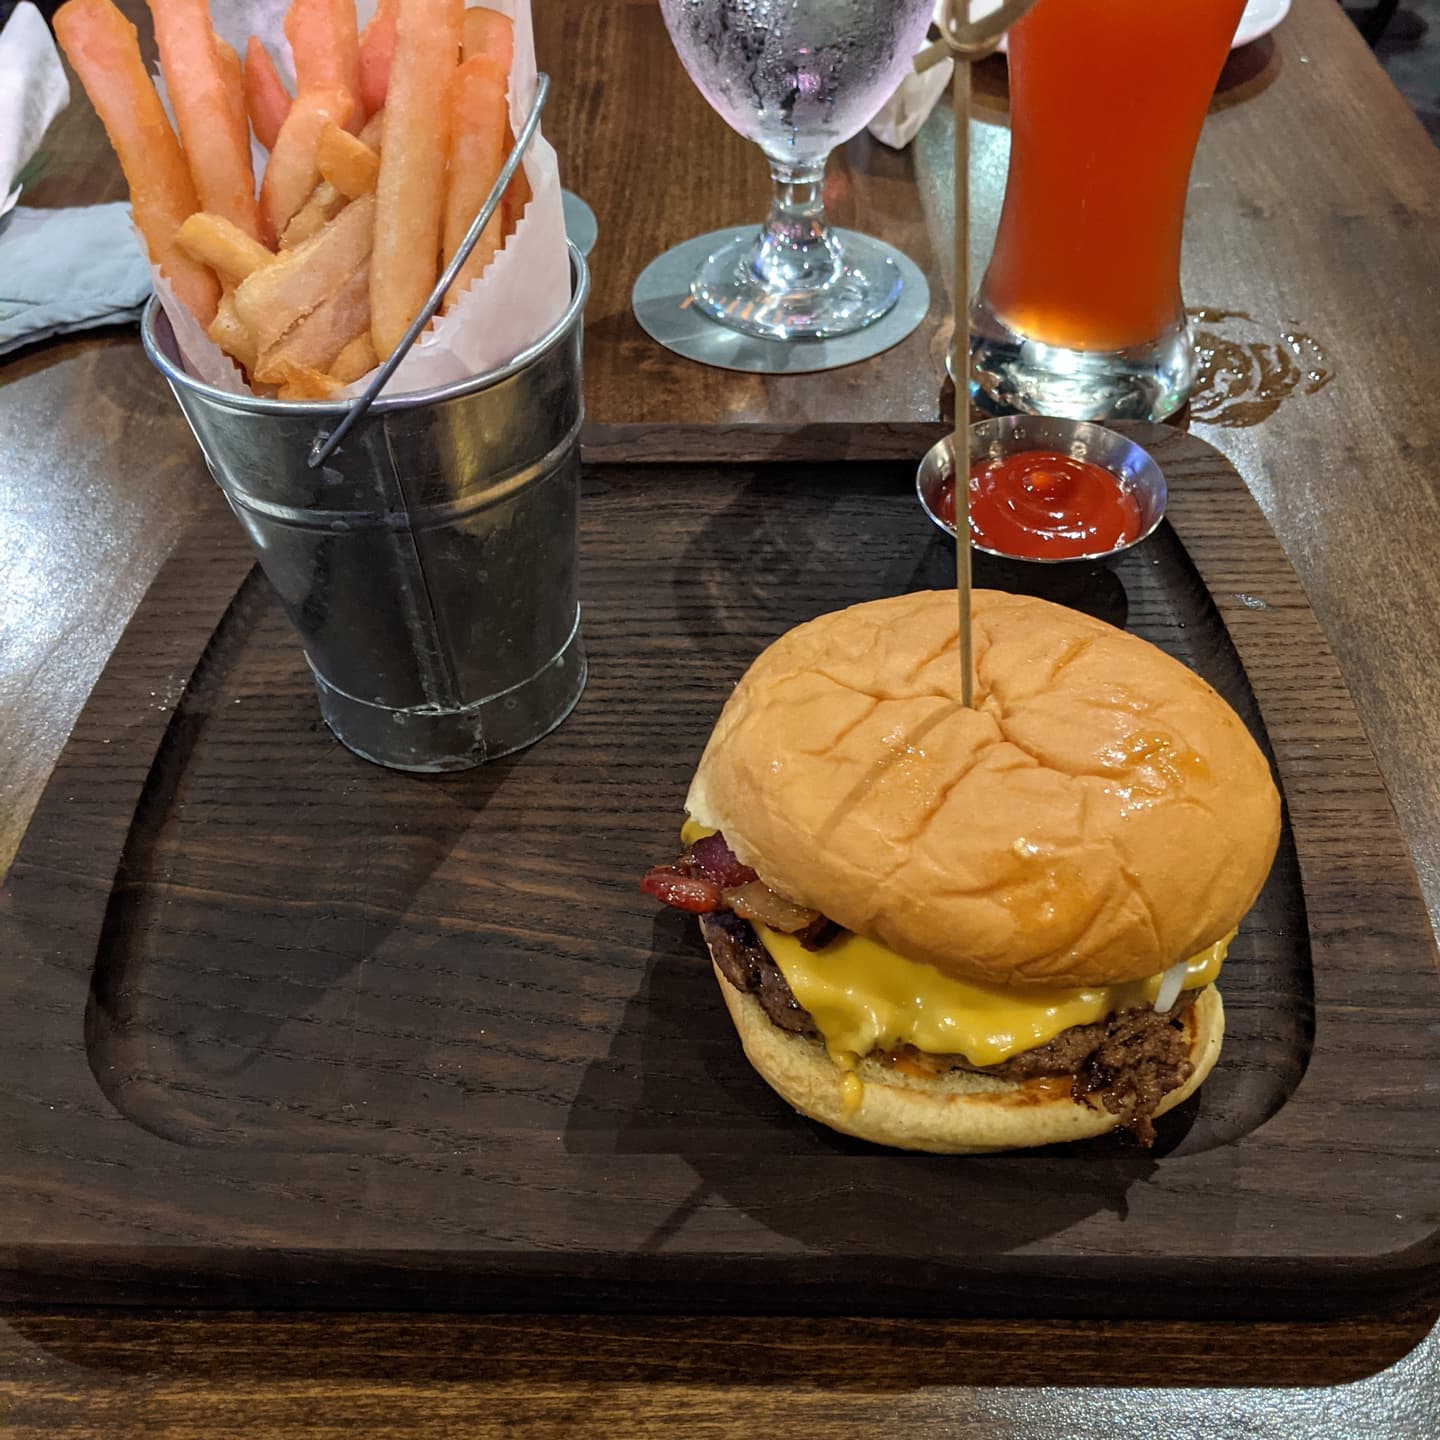 I've often maintained that even a nicely make and presented burger is worthy of #foodporn and this is one such burger at #fennecbham